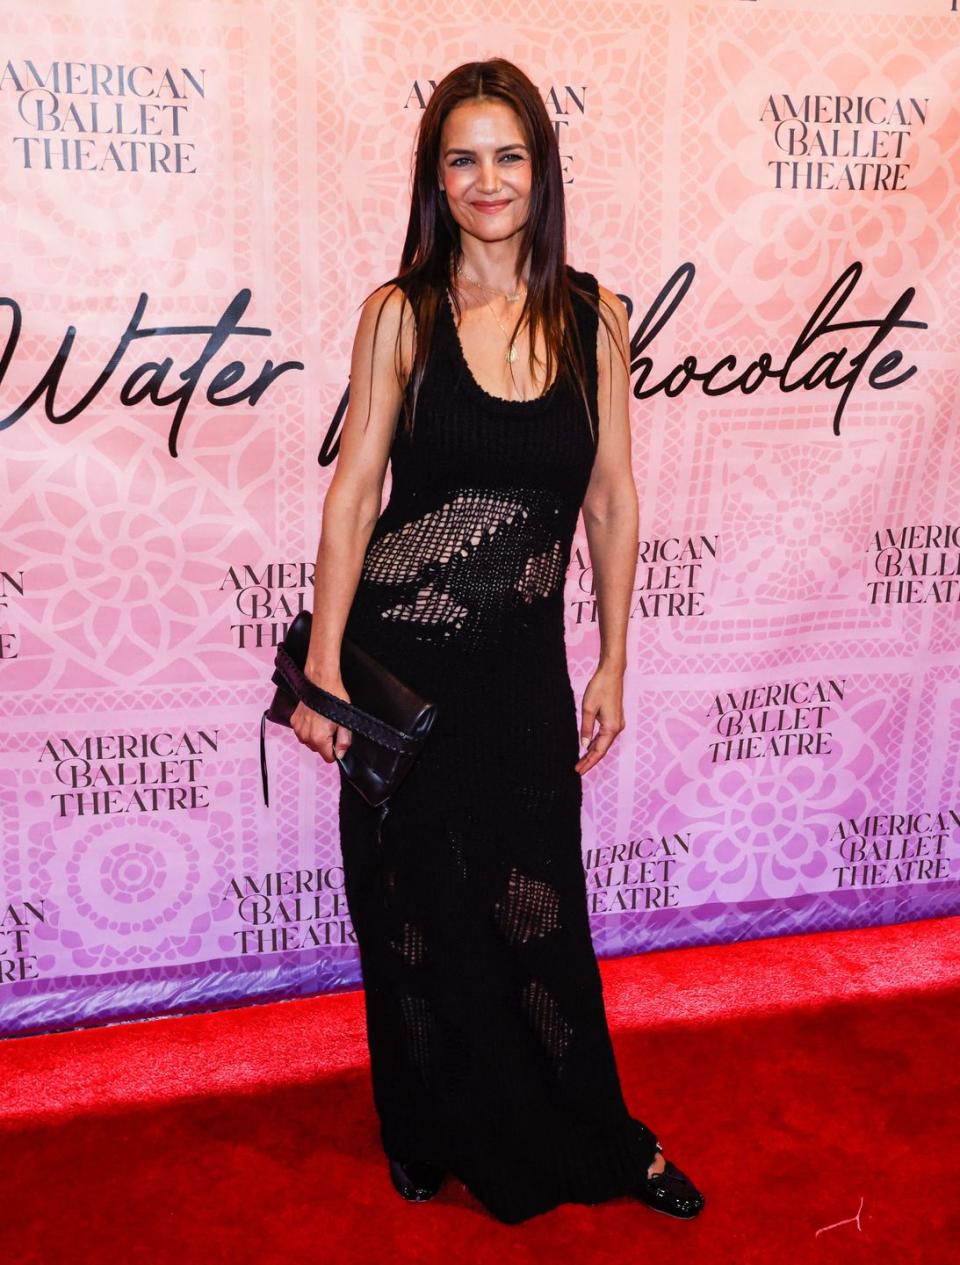 us actress katie holmes attends the 2023 american ballet theatres summer season opening night performance of like water for chocolate at the metropolitan opera house on june 22, 2023 in new york city photo by kena betancur afp photo by kena betancurafp via getty images